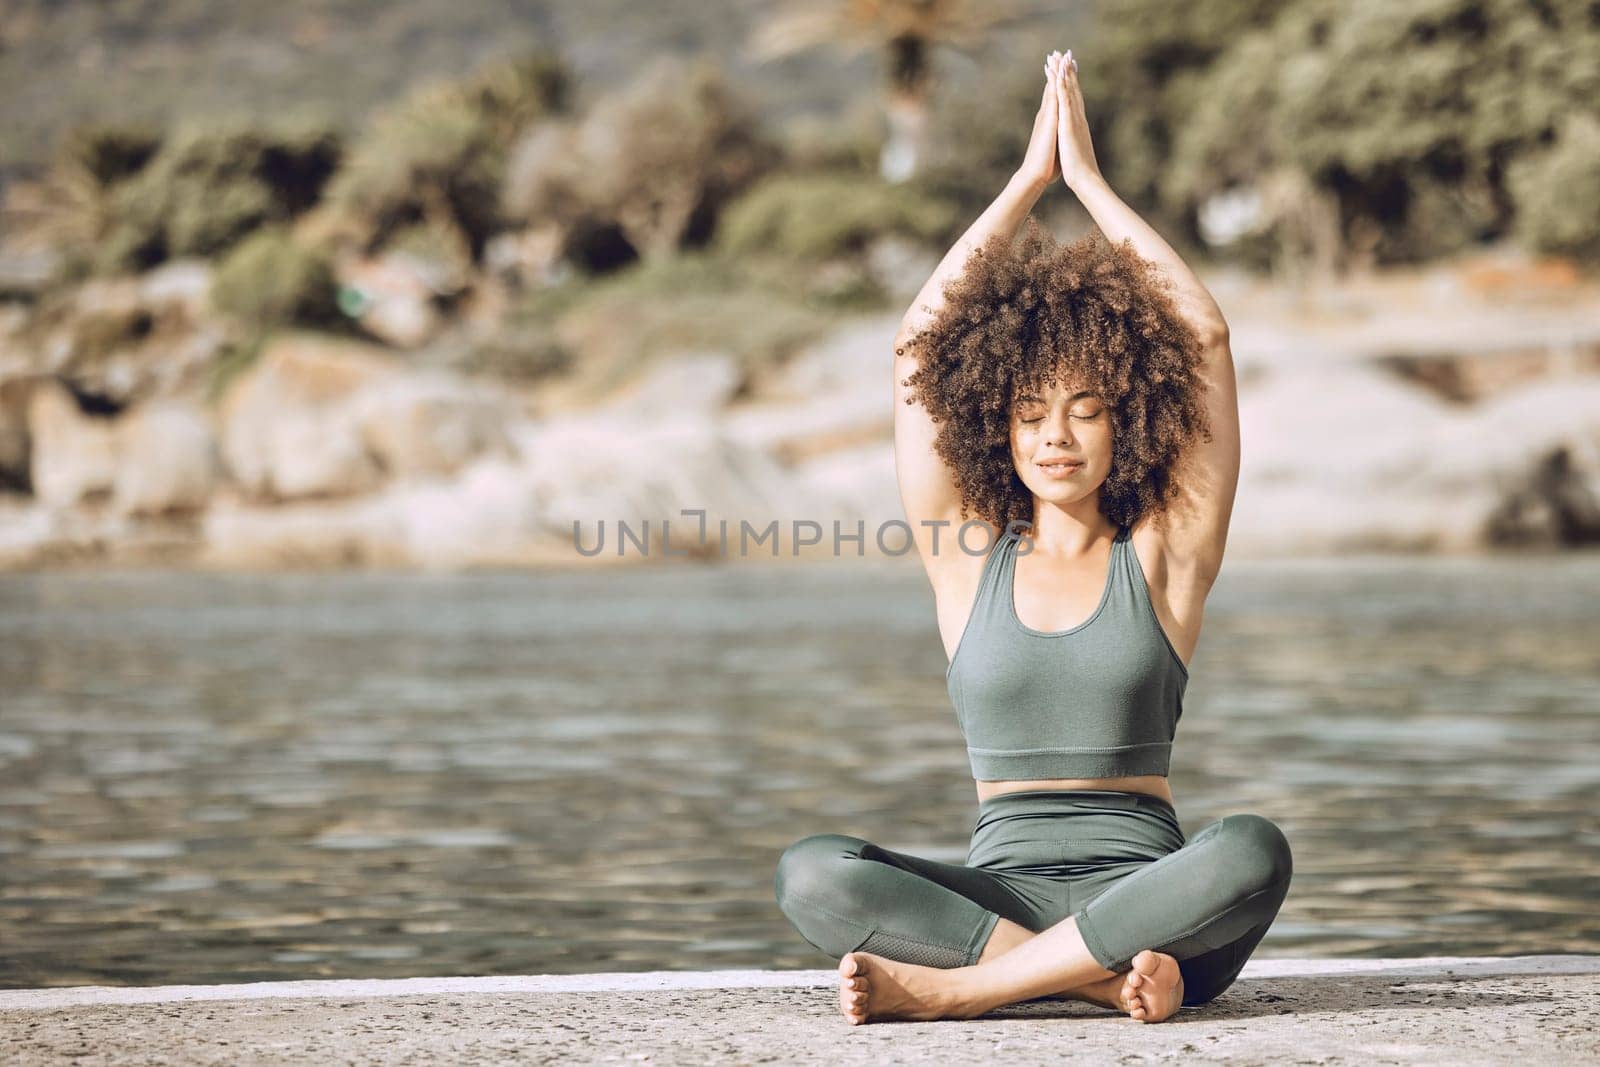 Yoga, meditation and calm black woman outdoor by beach, river or lake for healthy, wellness or fitness lifestyle. Mental health, peace and inner healing girl meditate, spiritual and workout in nature.